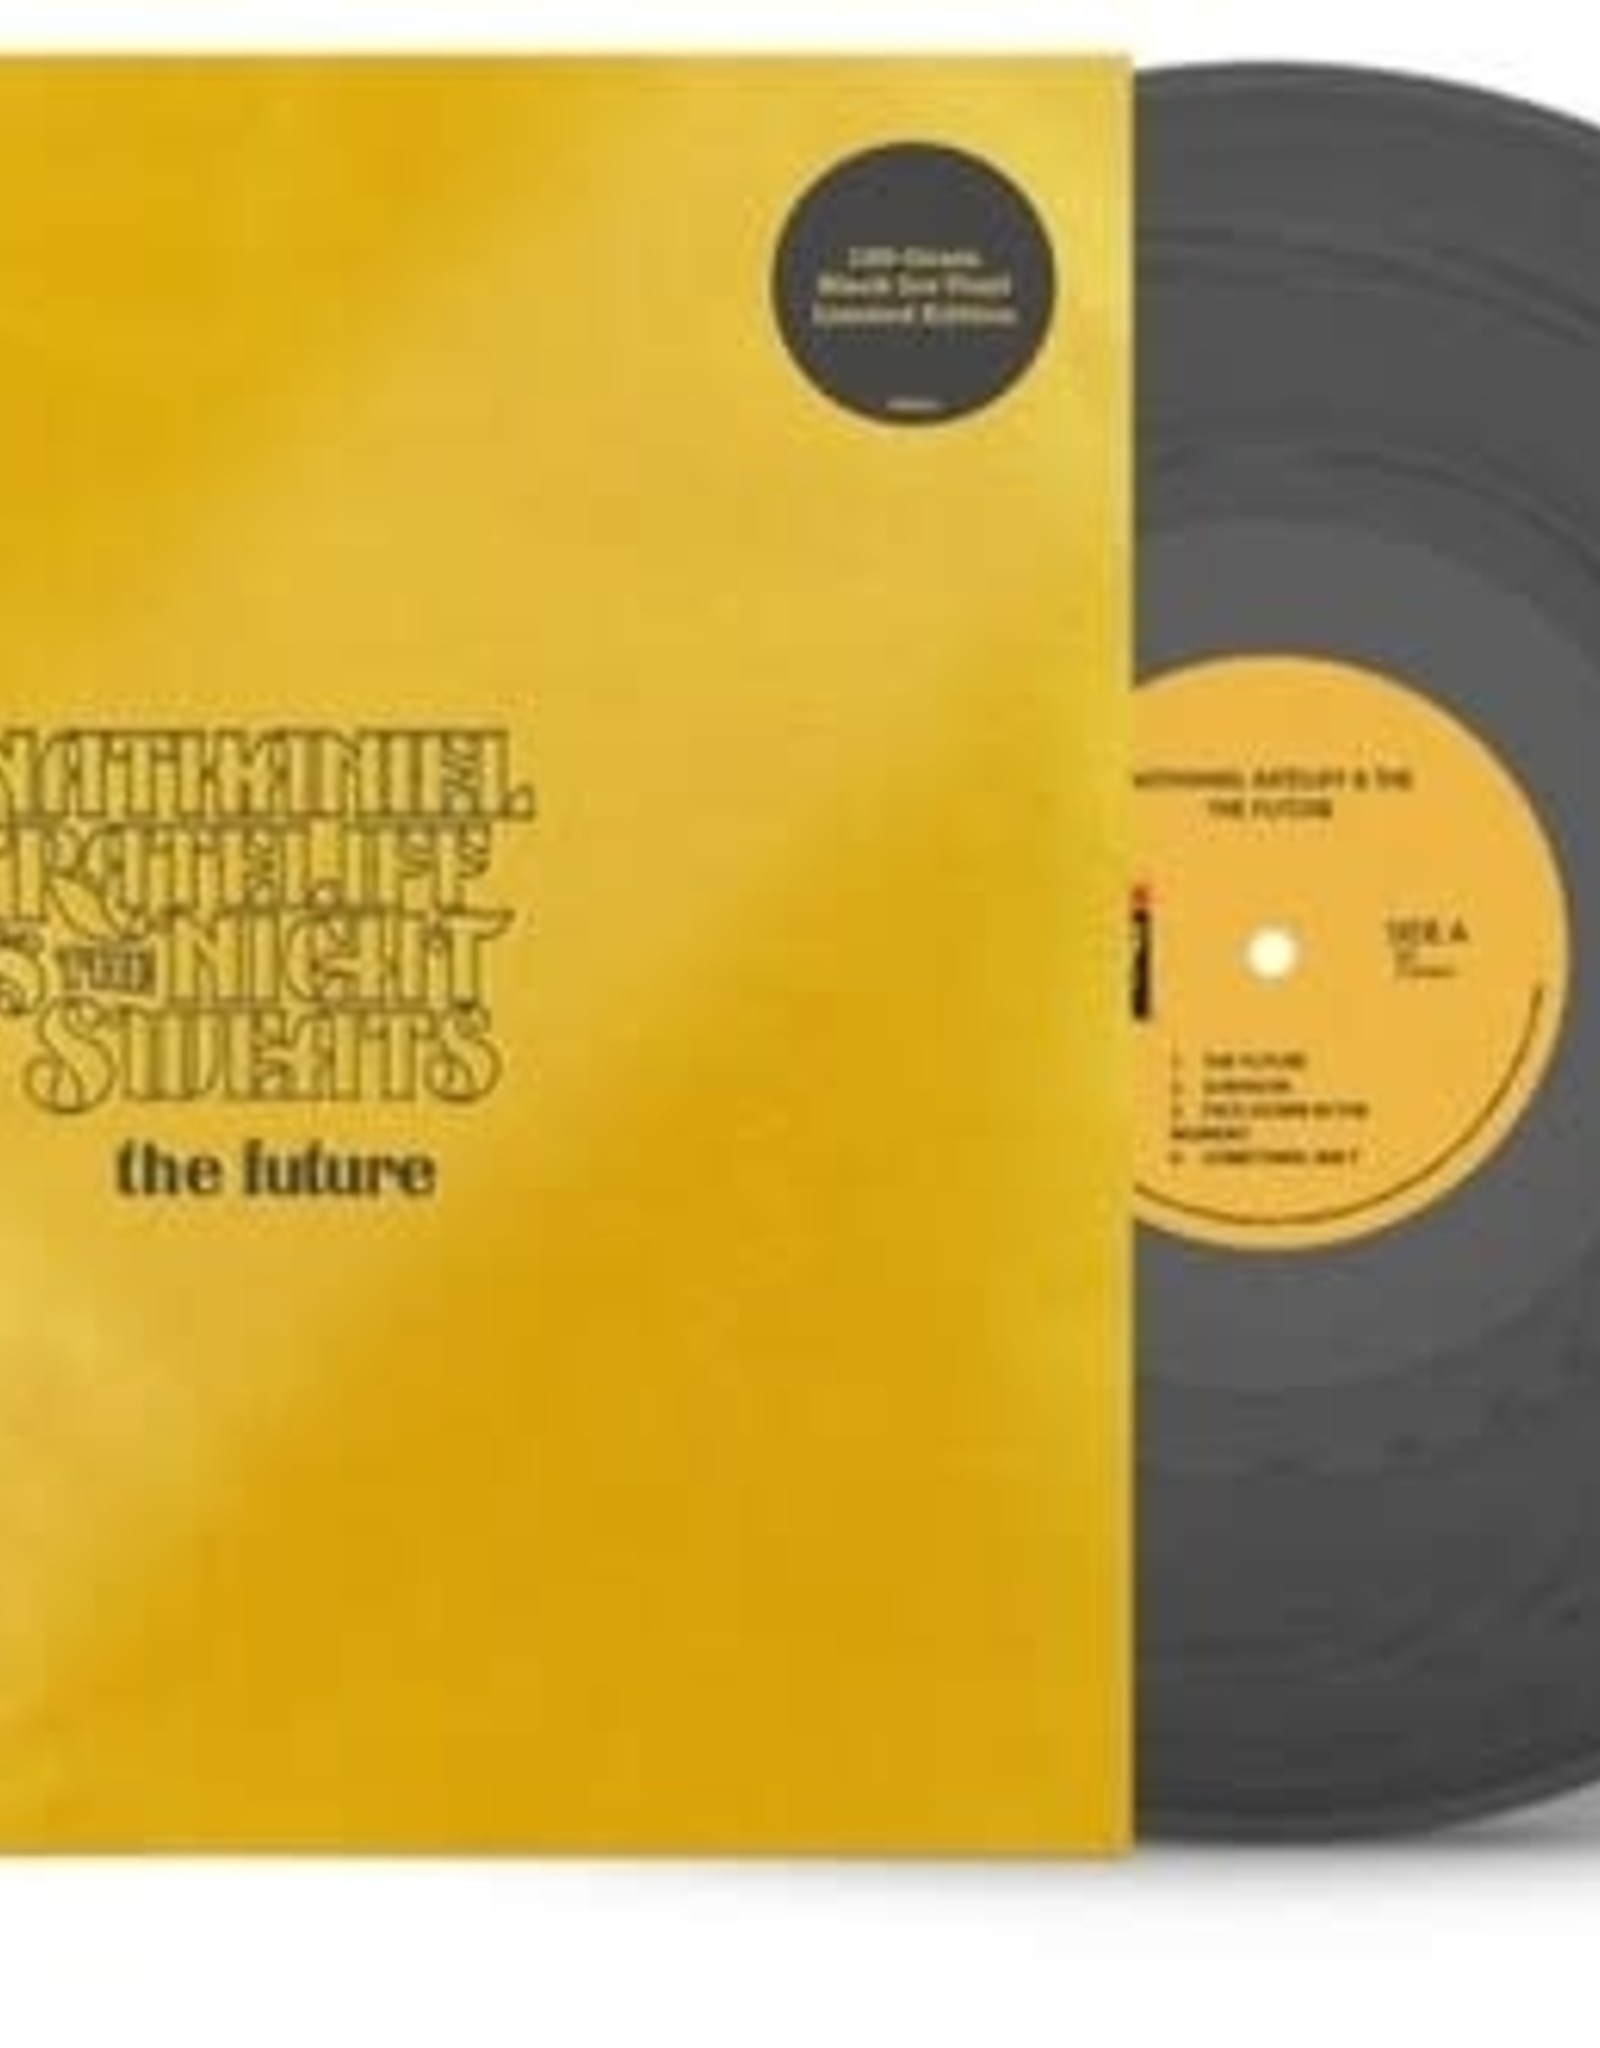 Nathaniel Rateliff - The Future [Black Ice LP] (Limited Edition, Foil Cover)